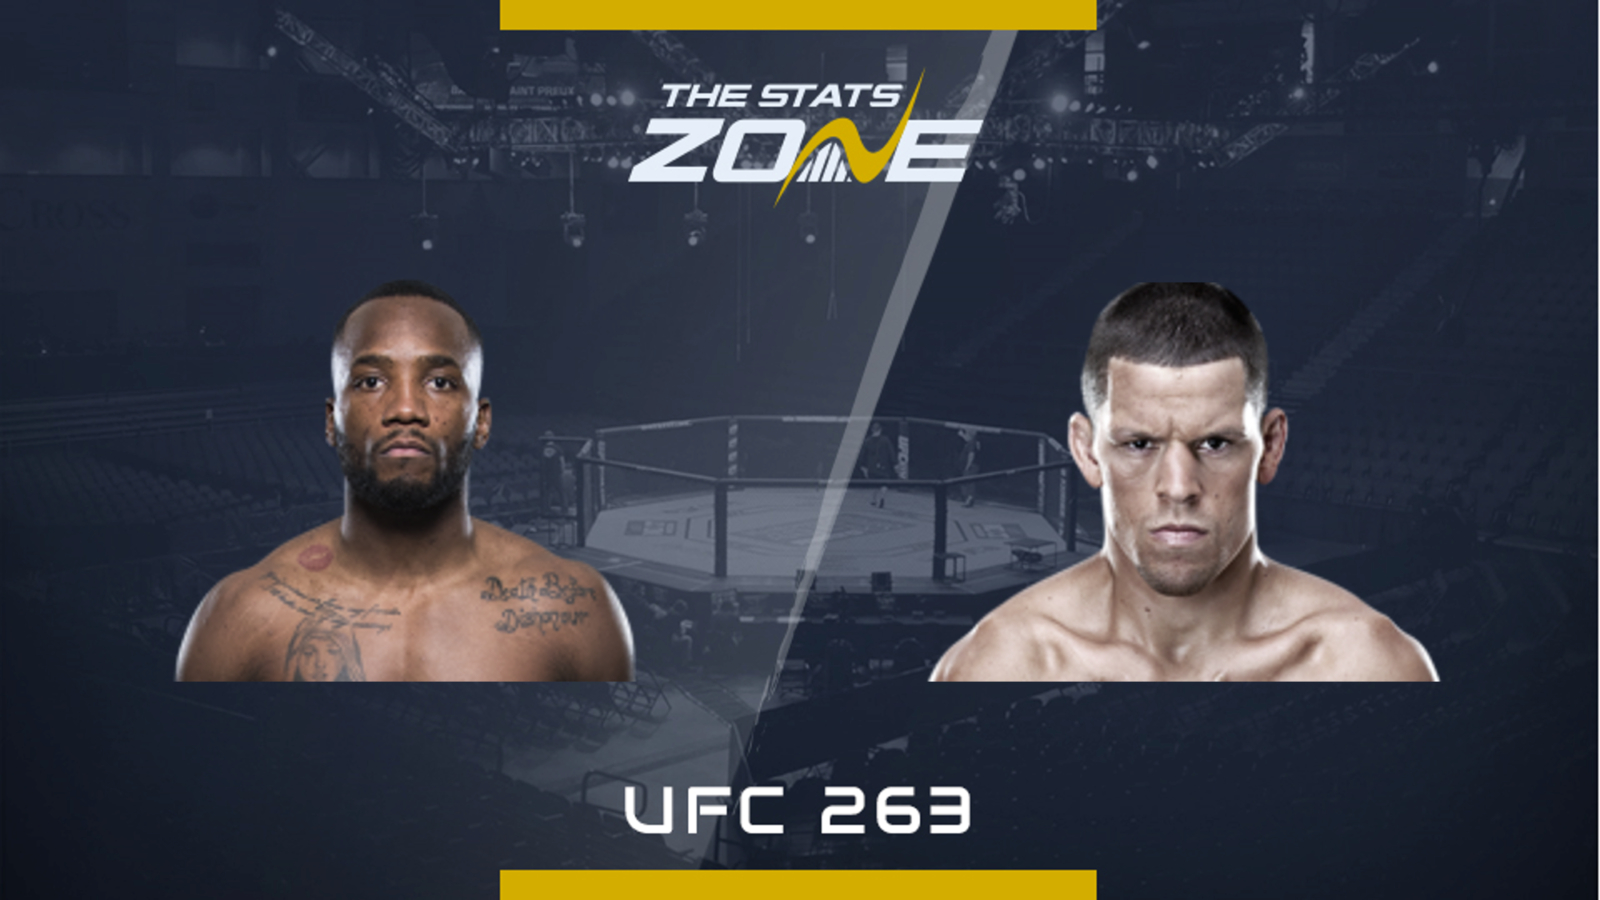 Mma Preview Leon Edwards Vs Nate Diaz At Ufc 263 The Stats Zone